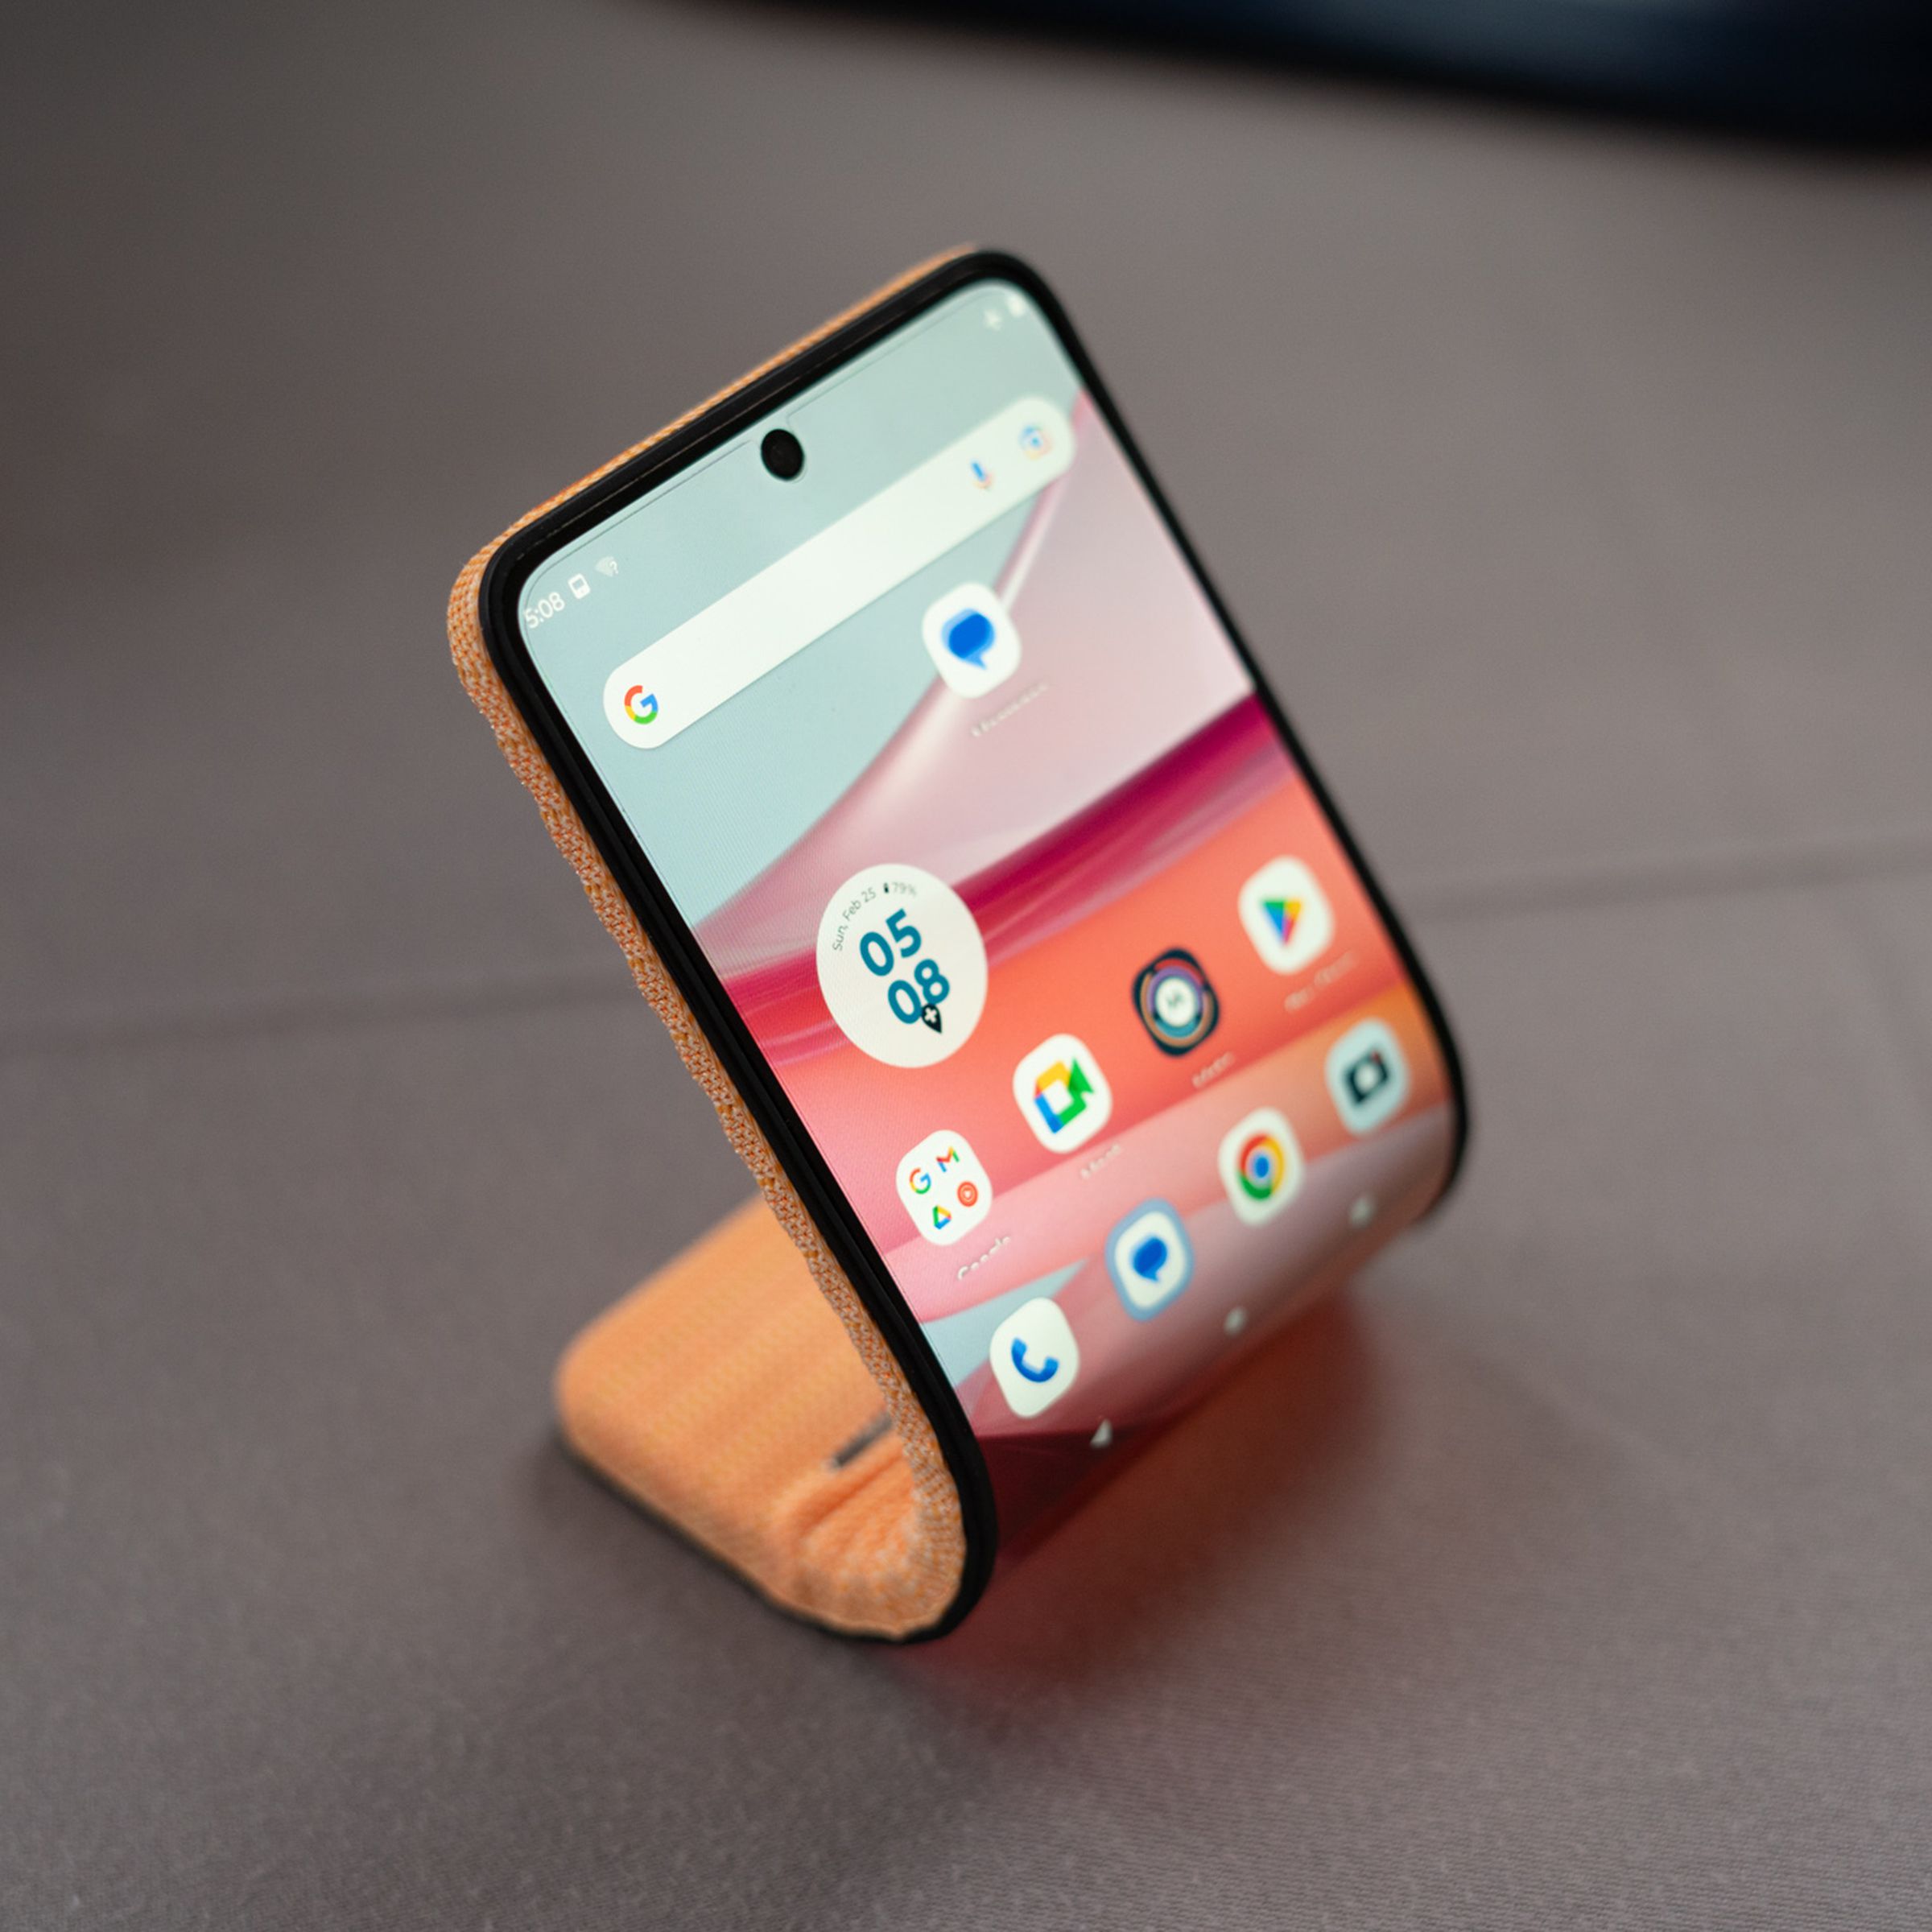 Motorola’s bending phone concept, curved and sitting on a table.